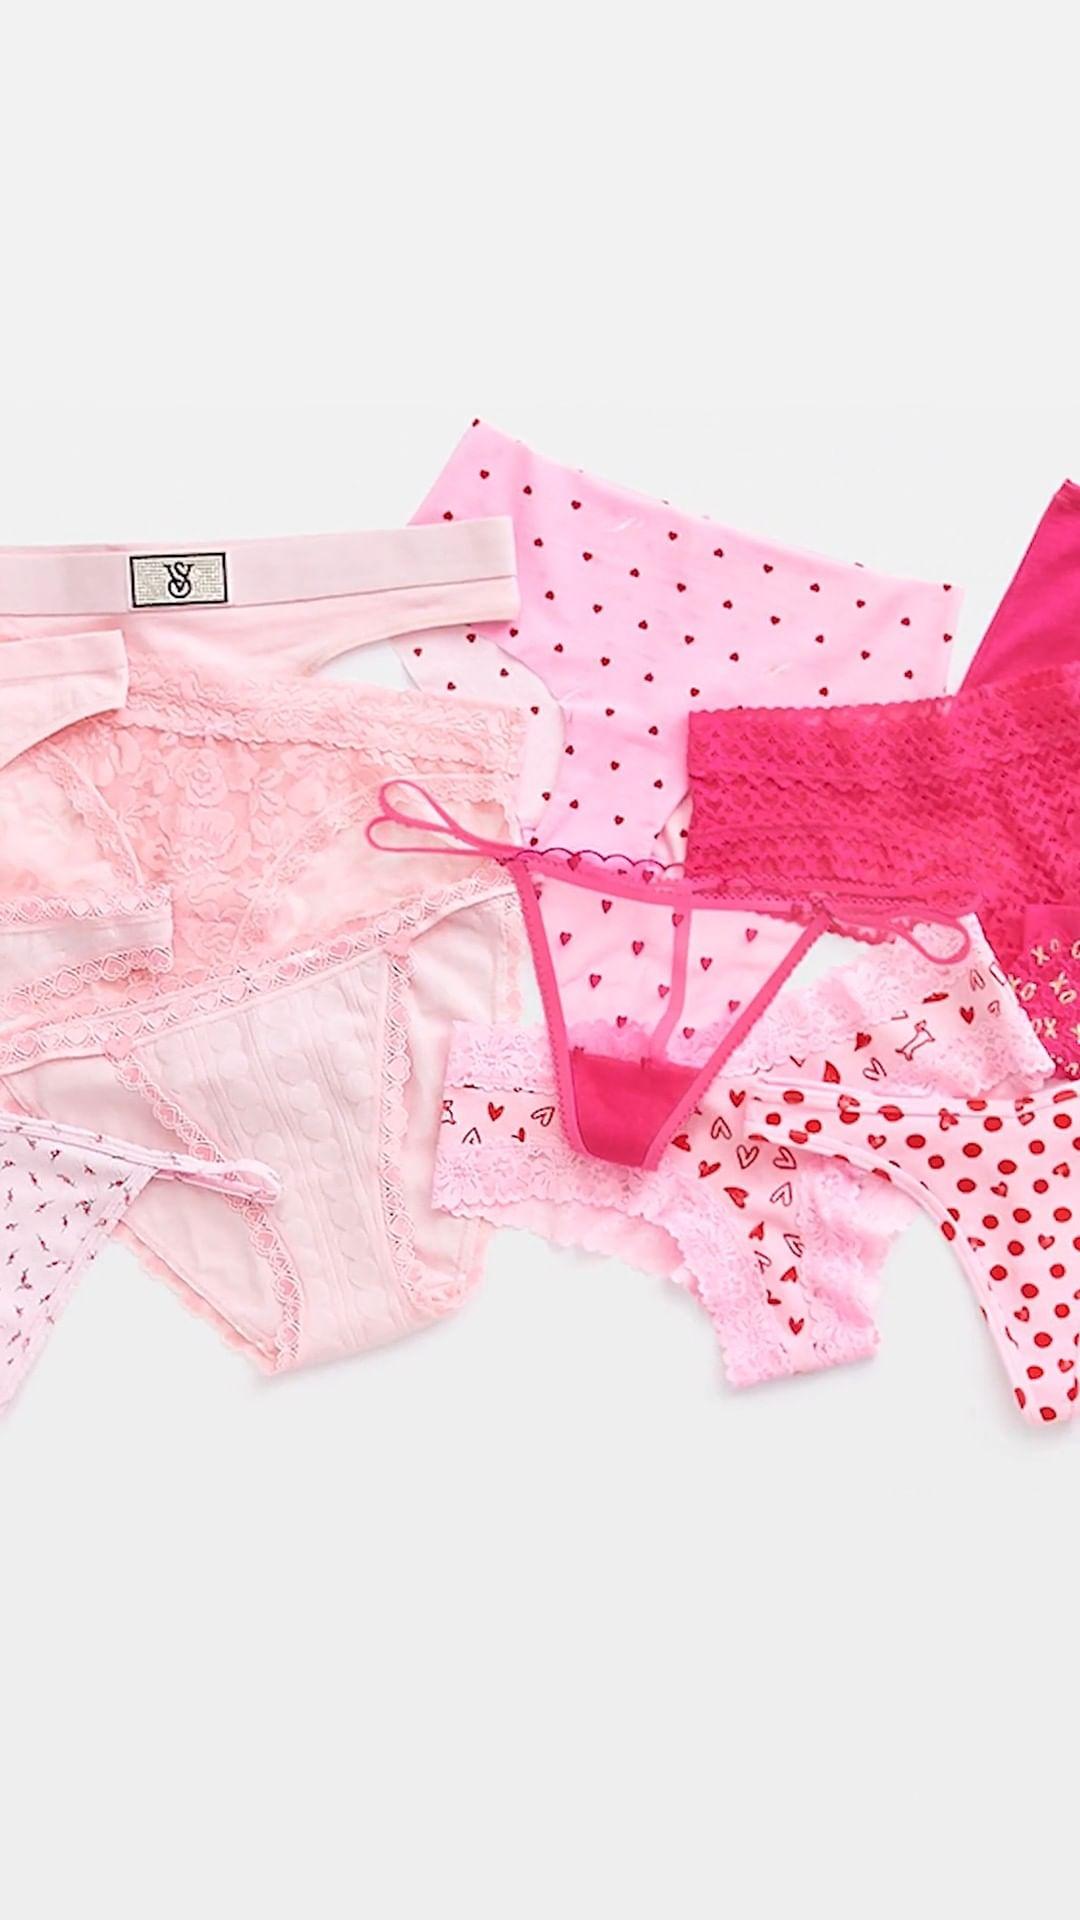 Cue up the romance—a certain heart-filled holiday is right around the corner. And for a limited time, embrace all the lace, patterns, and prints with 7/$35 Panties.